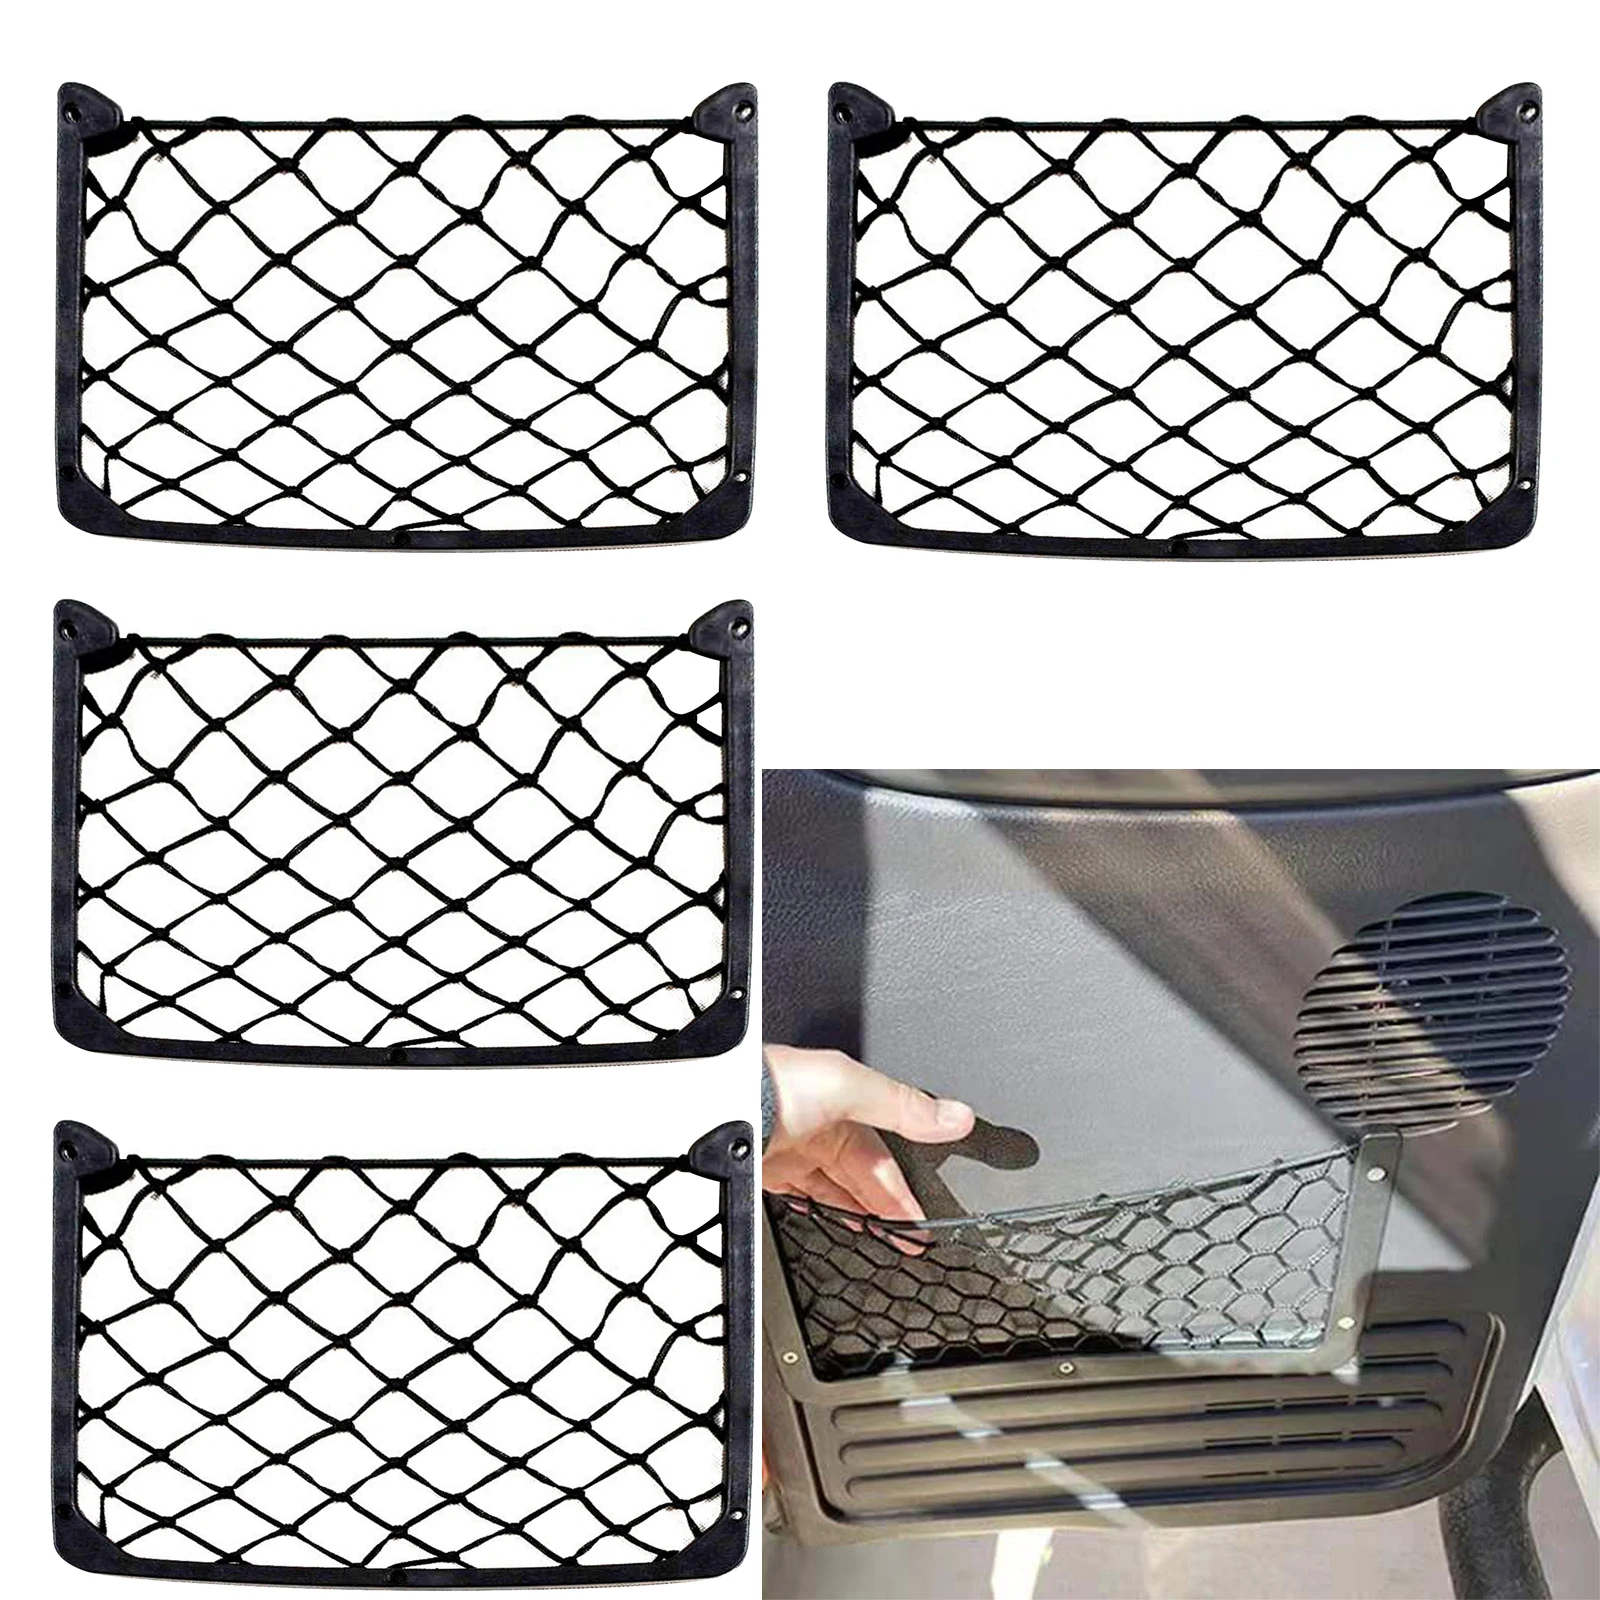 Car Storage Net Large Size ABS Plastic Netting Bag for Car Frame Stretch Mesh Net Universal Cargo with Screws for RV Car Trunk 1pcs gas lens connector brass collets body stubby gas lens connector w mesh universal high quality lightweight